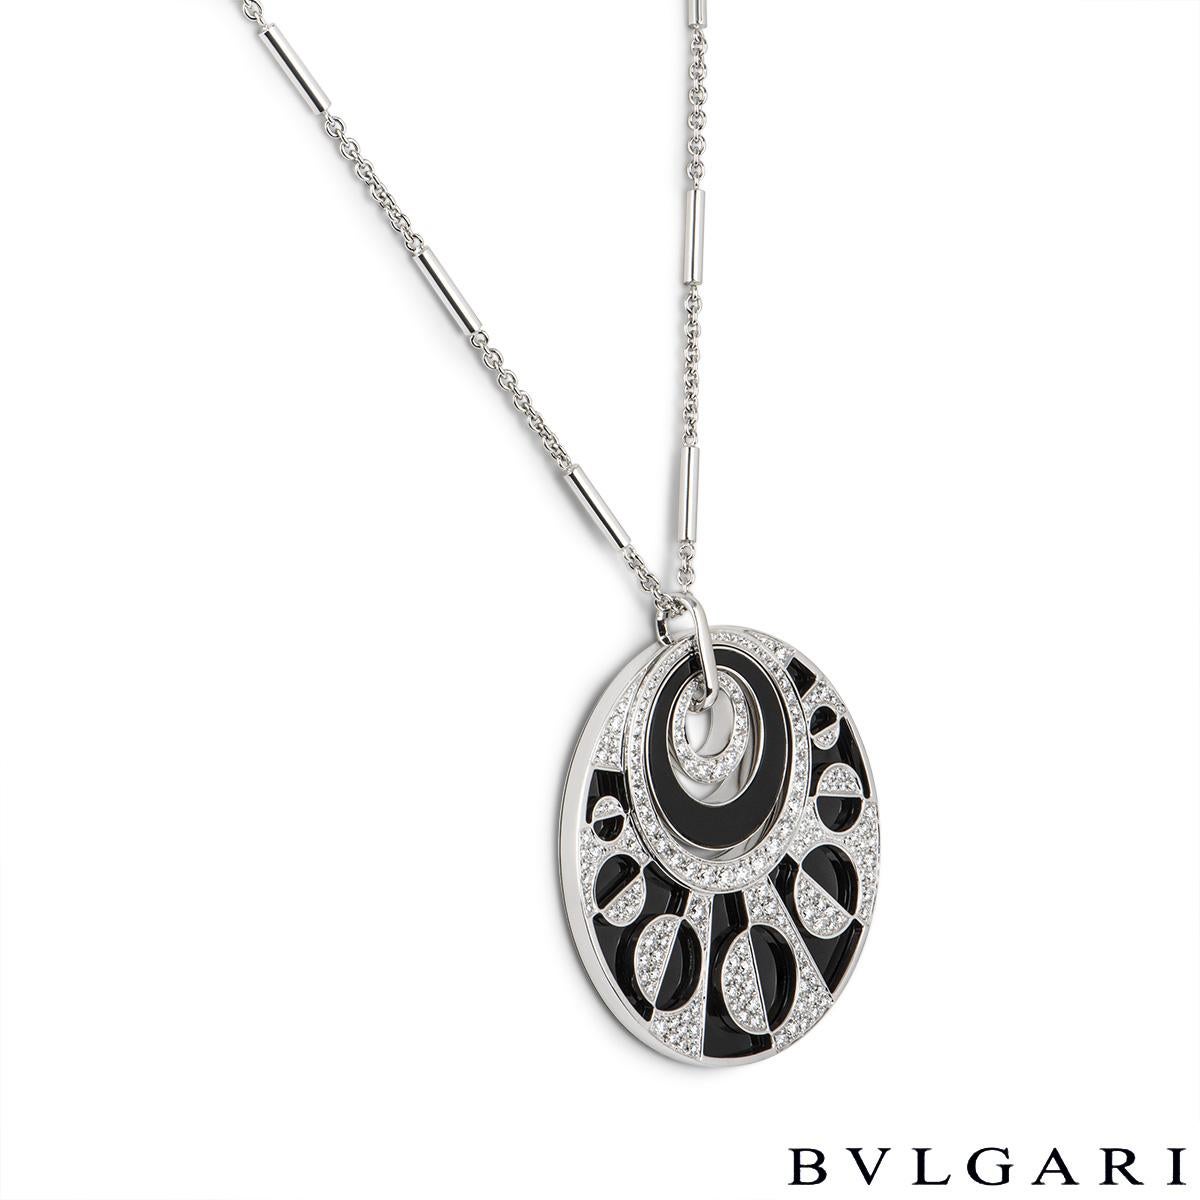 A mesmerising 18k white gold diamond and onyx large necklace by Bvlgari from the Intarsio collection. The necklace features 3 circular motifs within each other set with an onyx inlay and round brilliant cut diamonds in a pave setting with a total